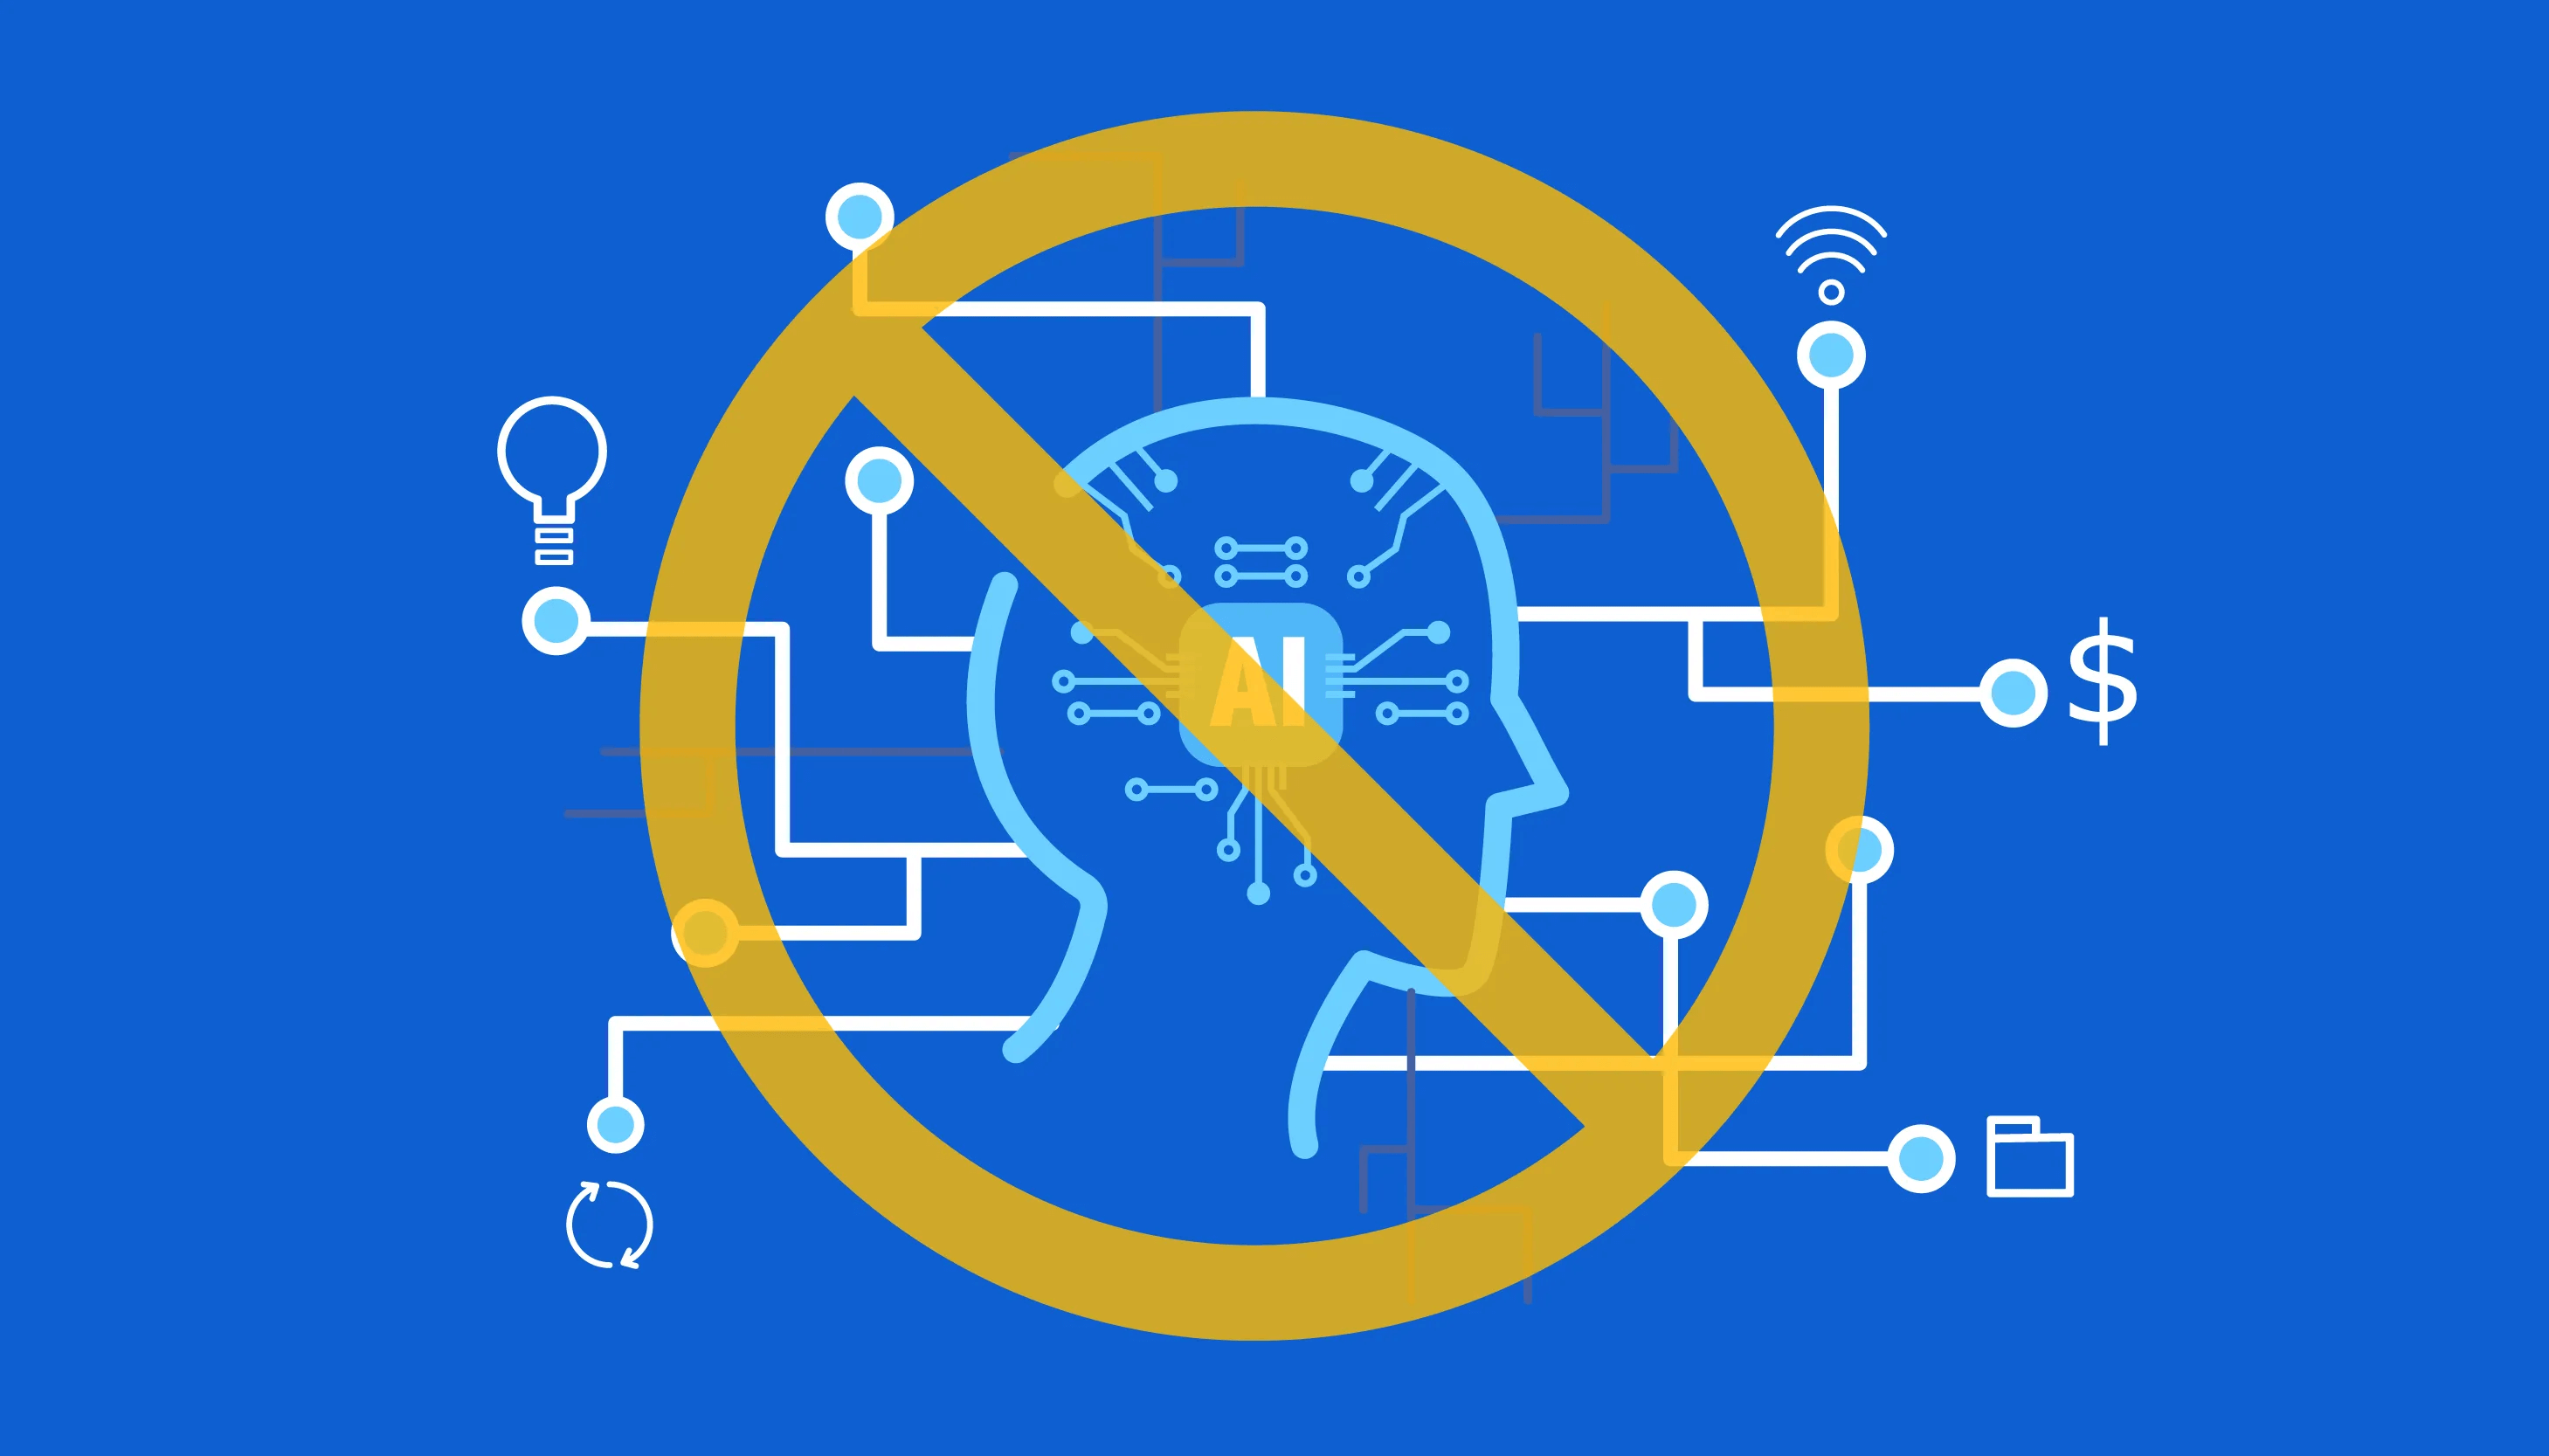 RPA is not AI or ML